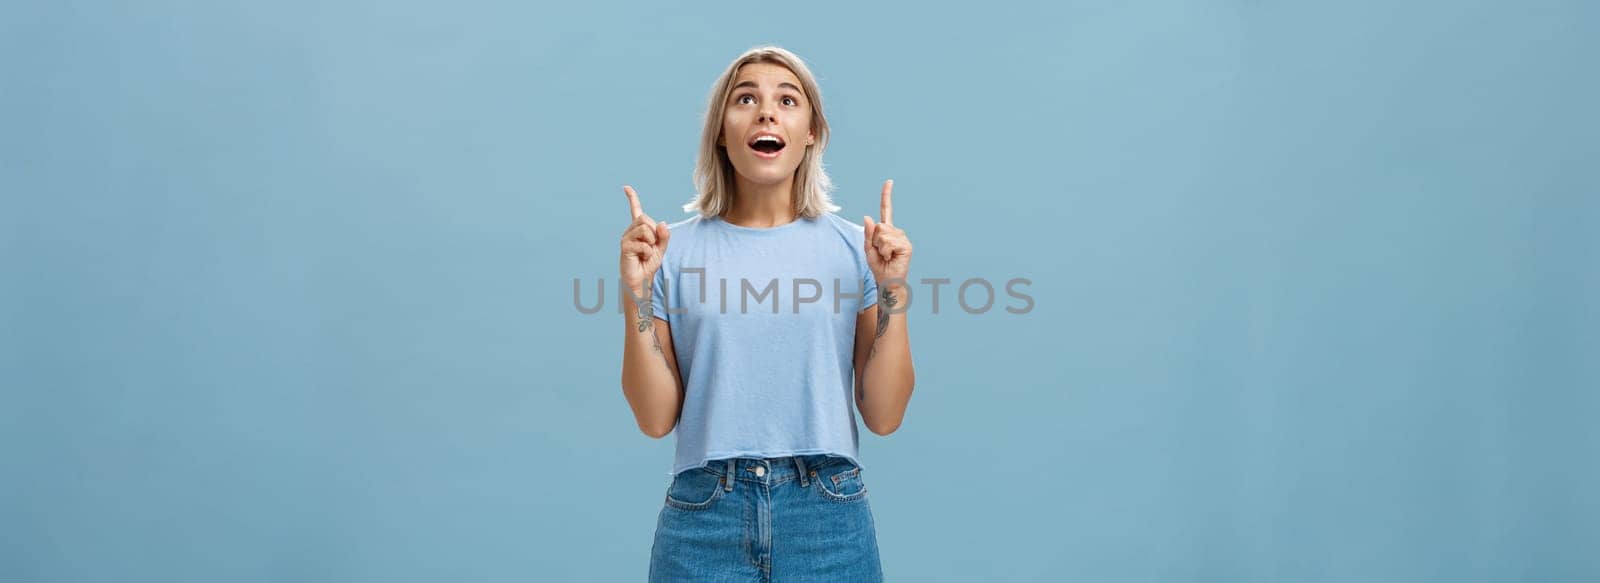 Lifestyle. Indoor shot of impressed speechless attractive fair-haired female student in casual t-shirt and denim shorts dropping jaw from amazement pointing and looking up intrigued over blue wall.